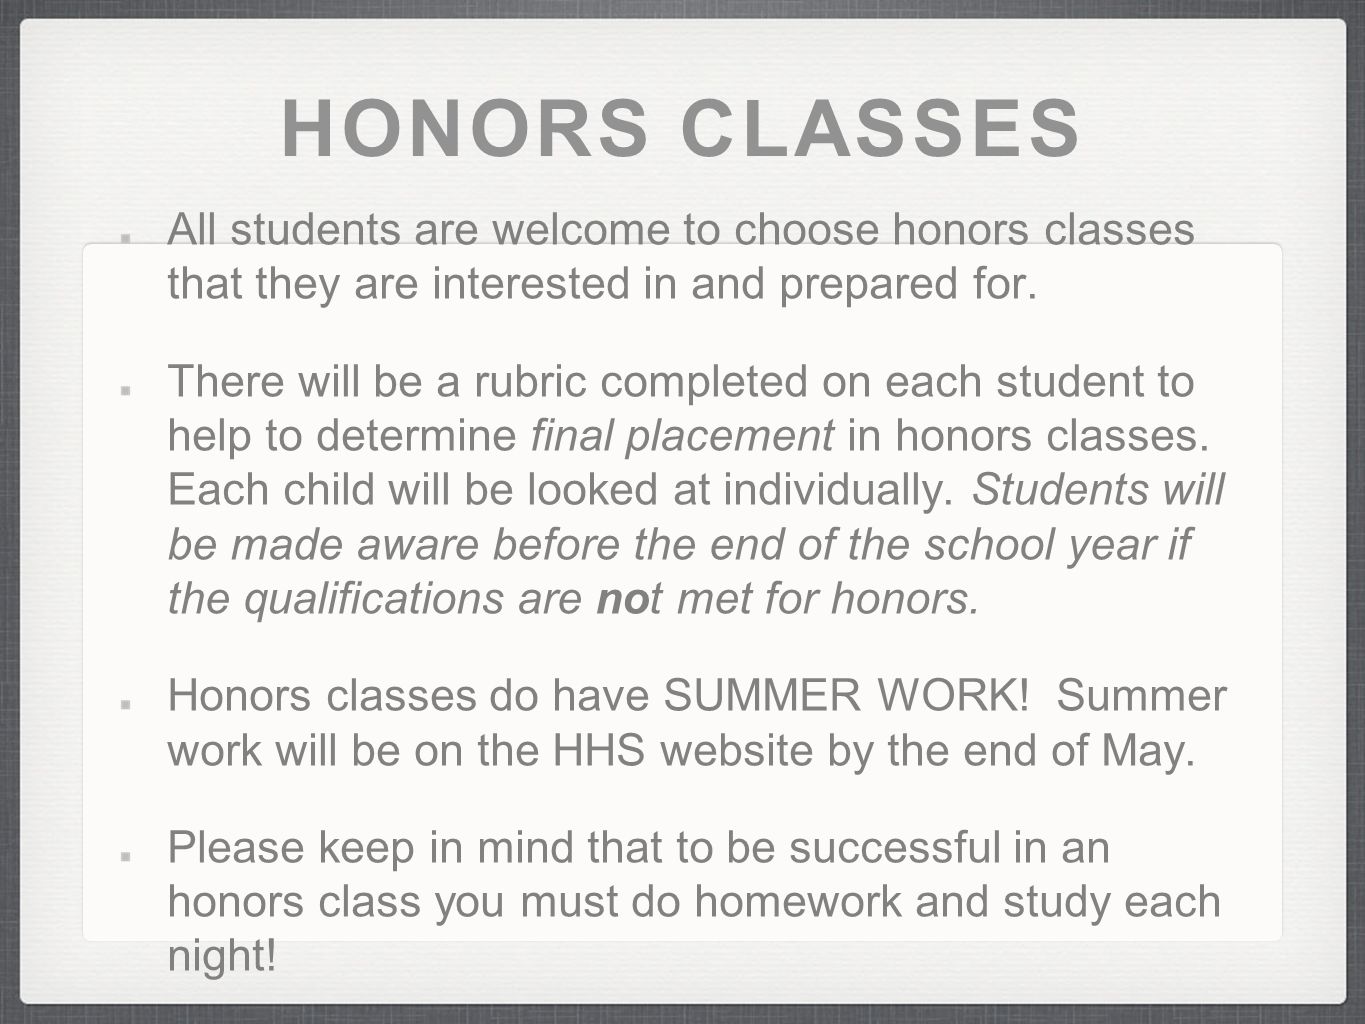 HONORS CLASSES All students are welcome to choose honors classes that they are interested in and prepared for.